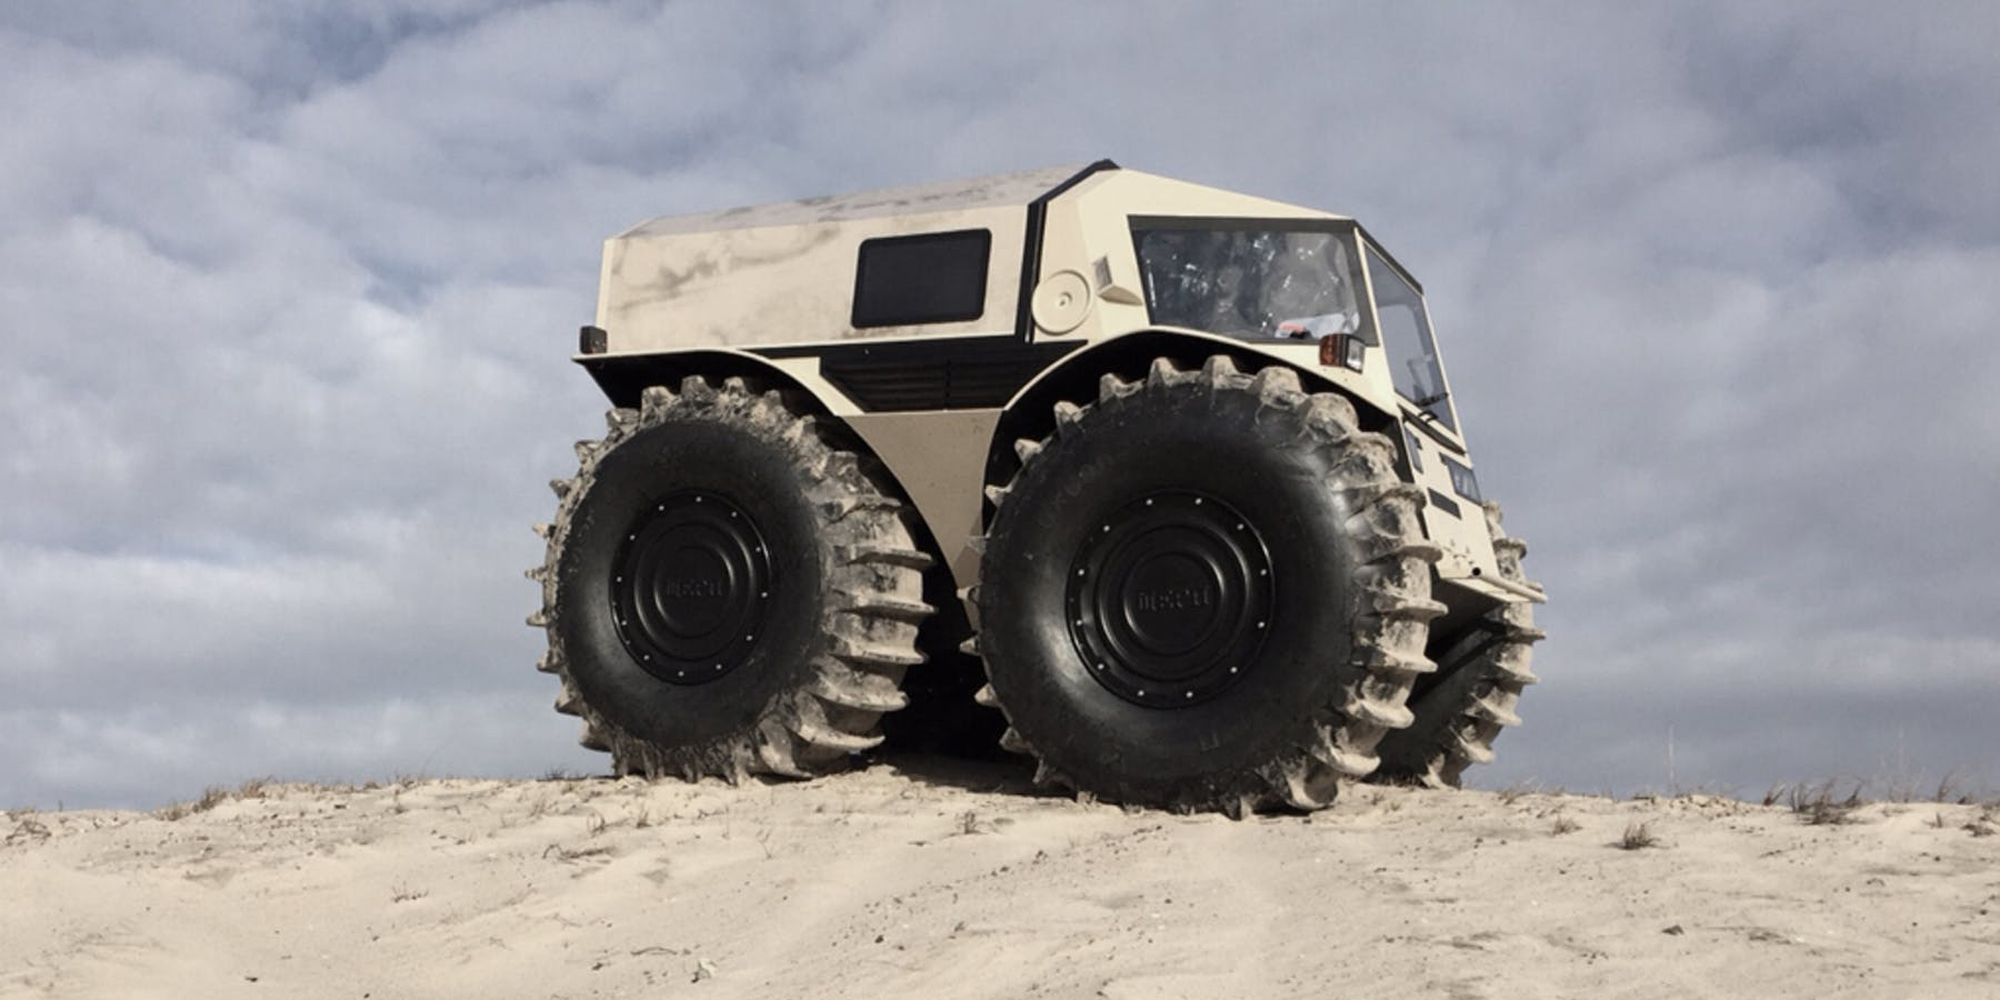 The Sherp Atv Is An Amphibious Vehicle For Plowing Through Any Terrain